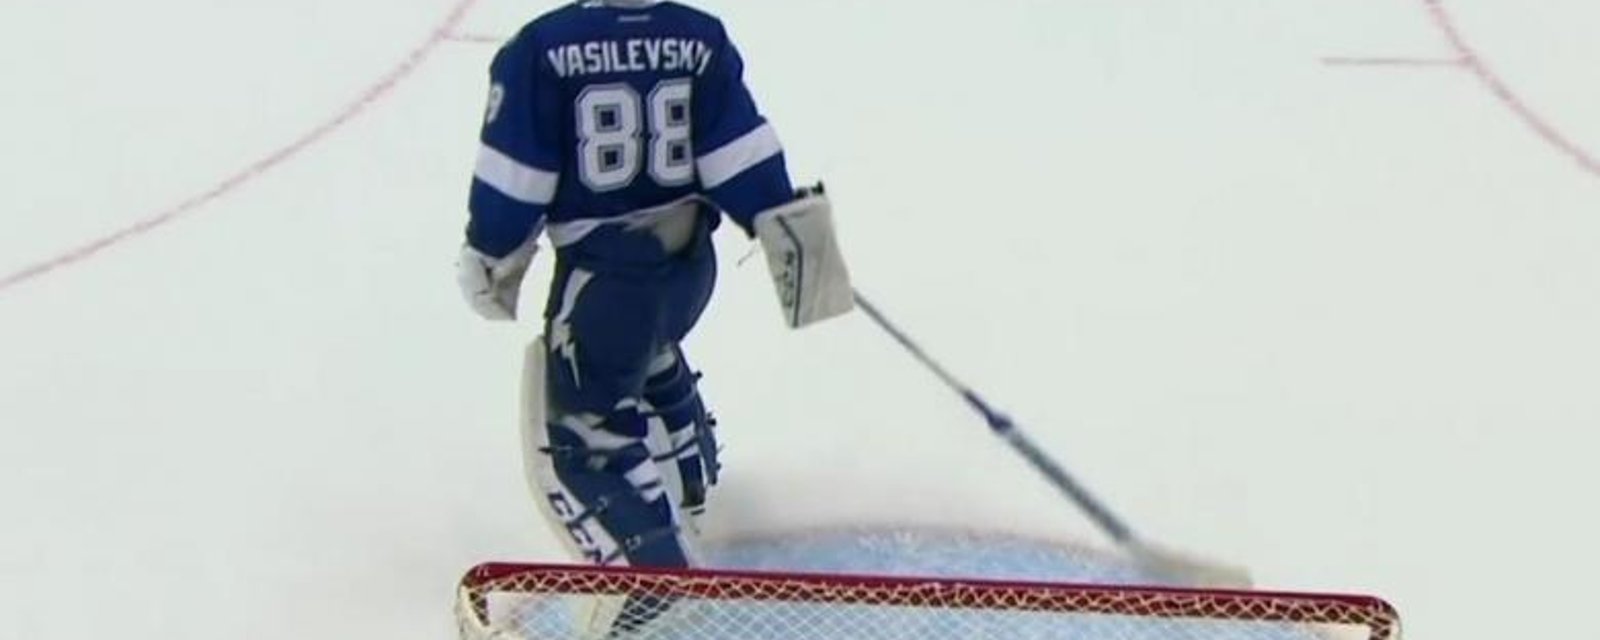 Lightning goalie throws his stick towards the bench to let his team know he's not happy.